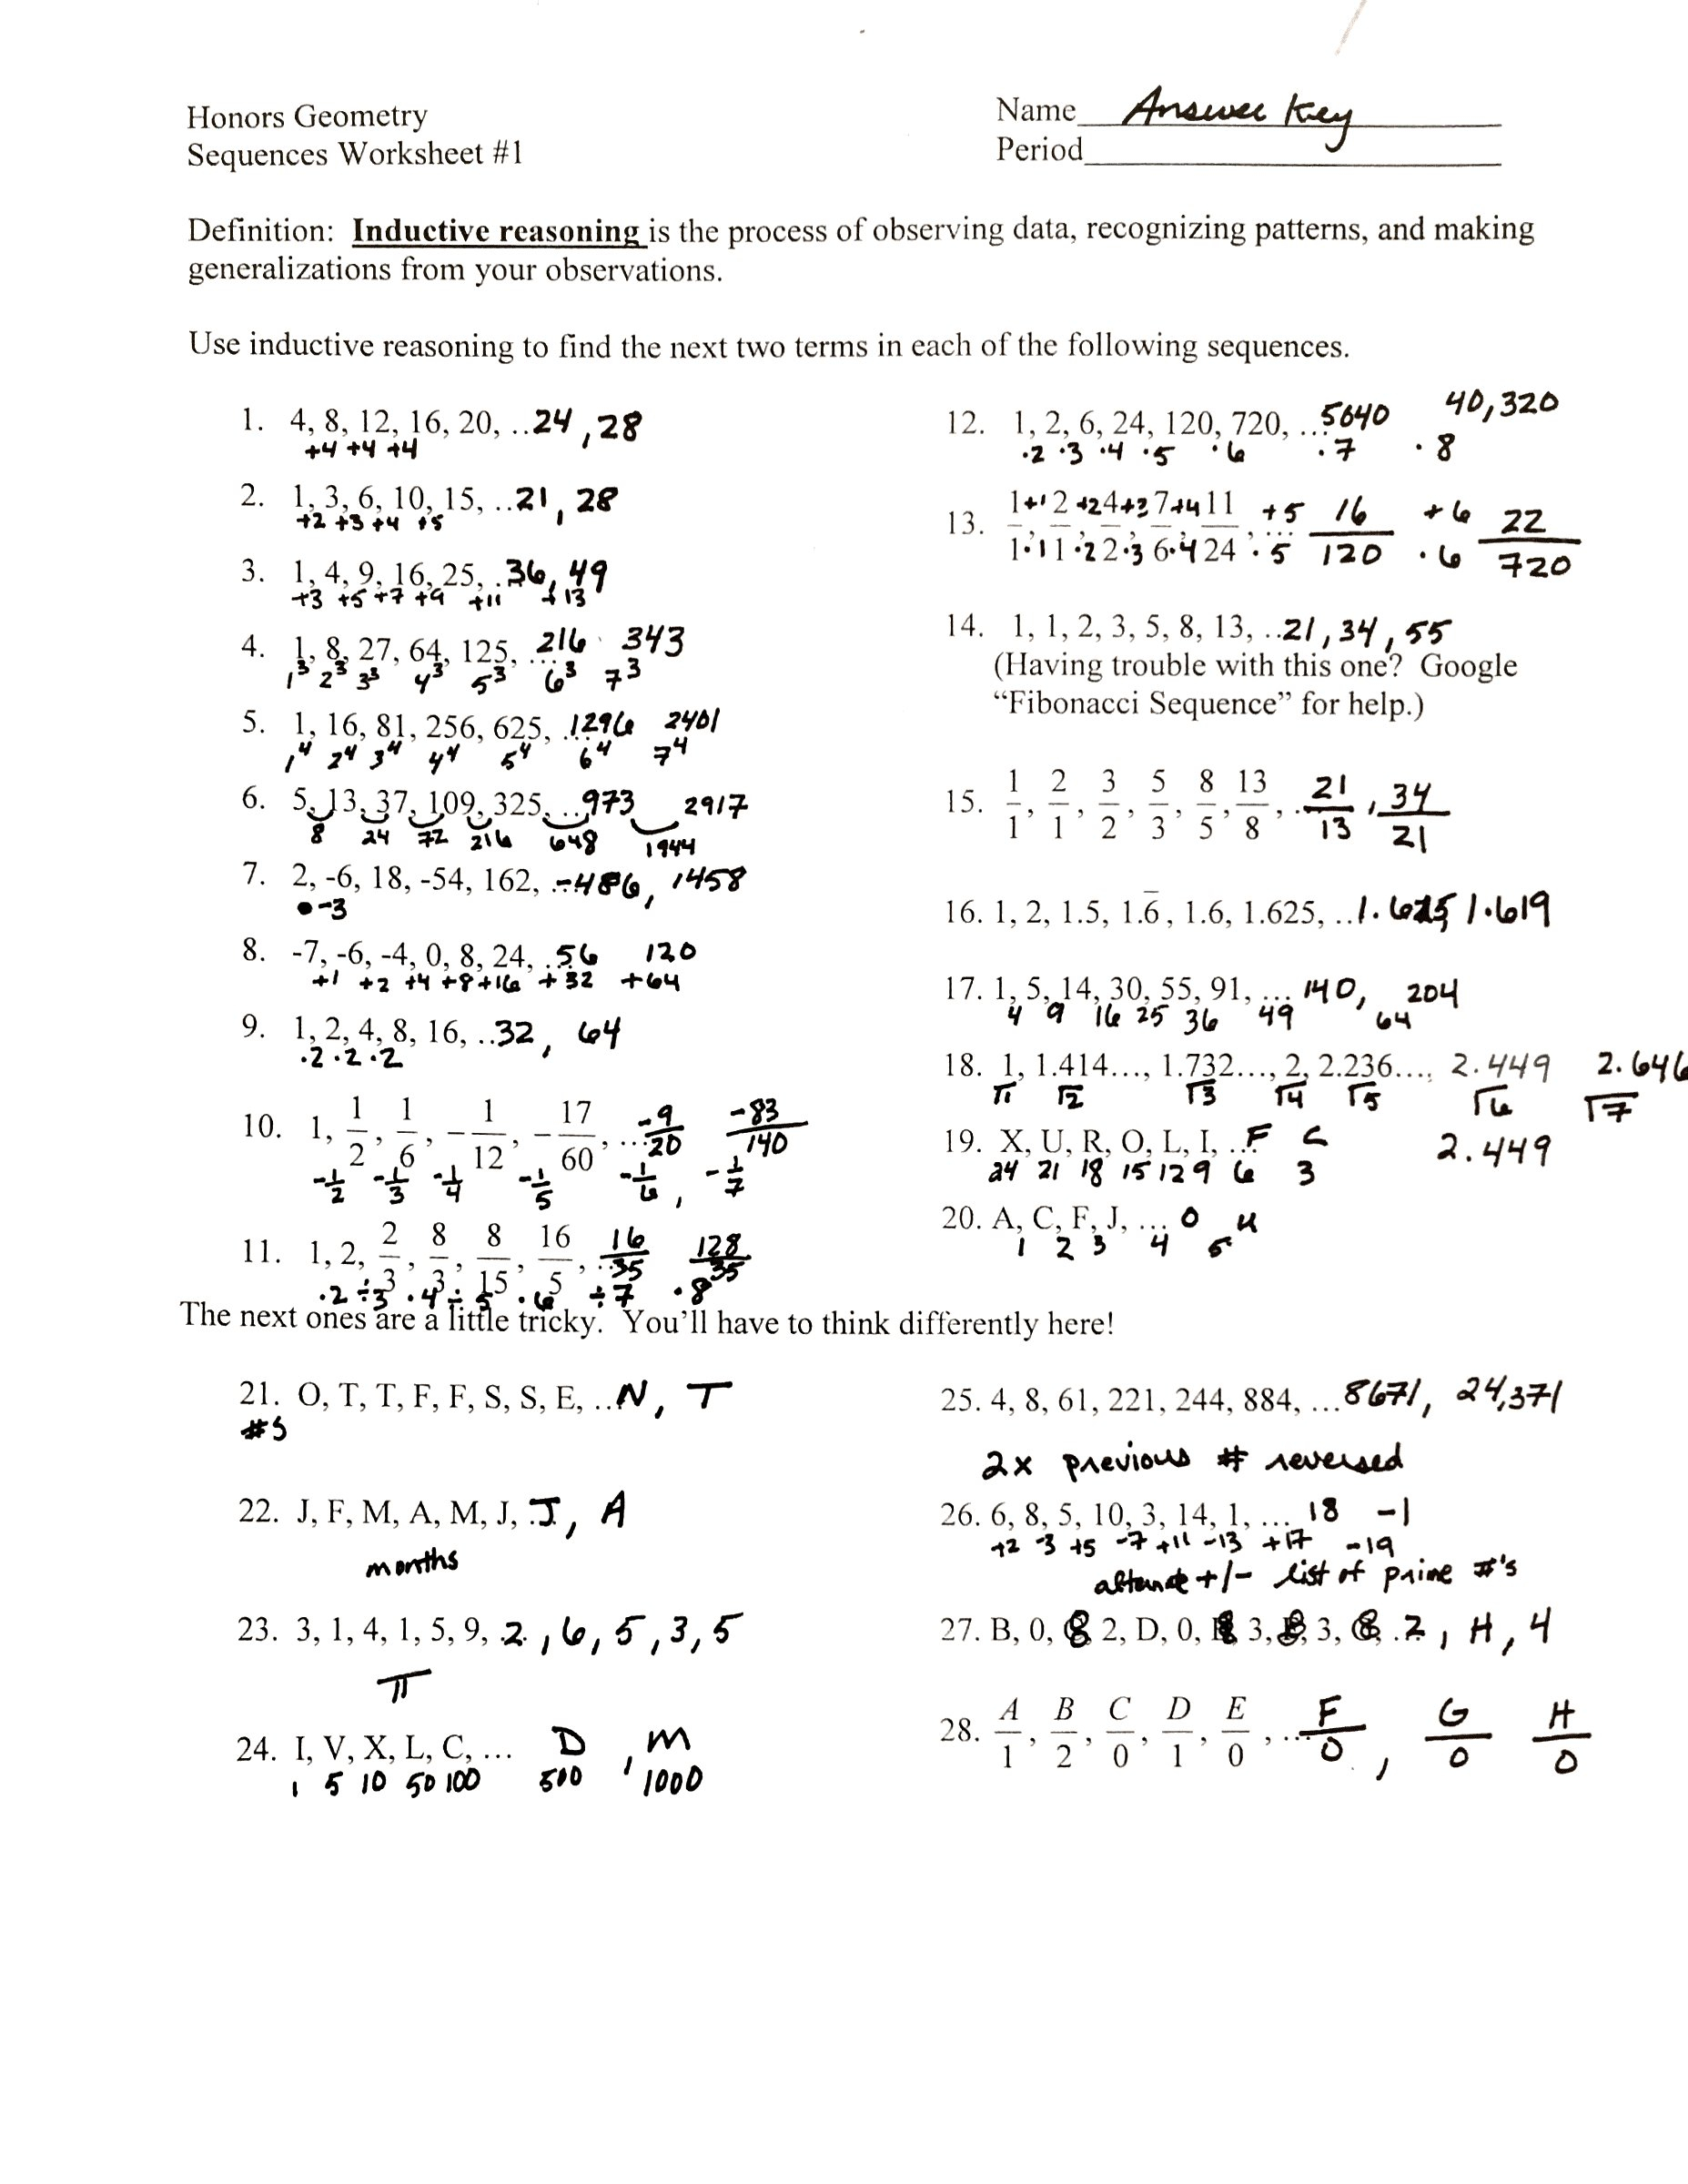 Arithmetic Sequences Worksheets The Best Worksheets Image Collection Together With Sequences Worksheet Answers